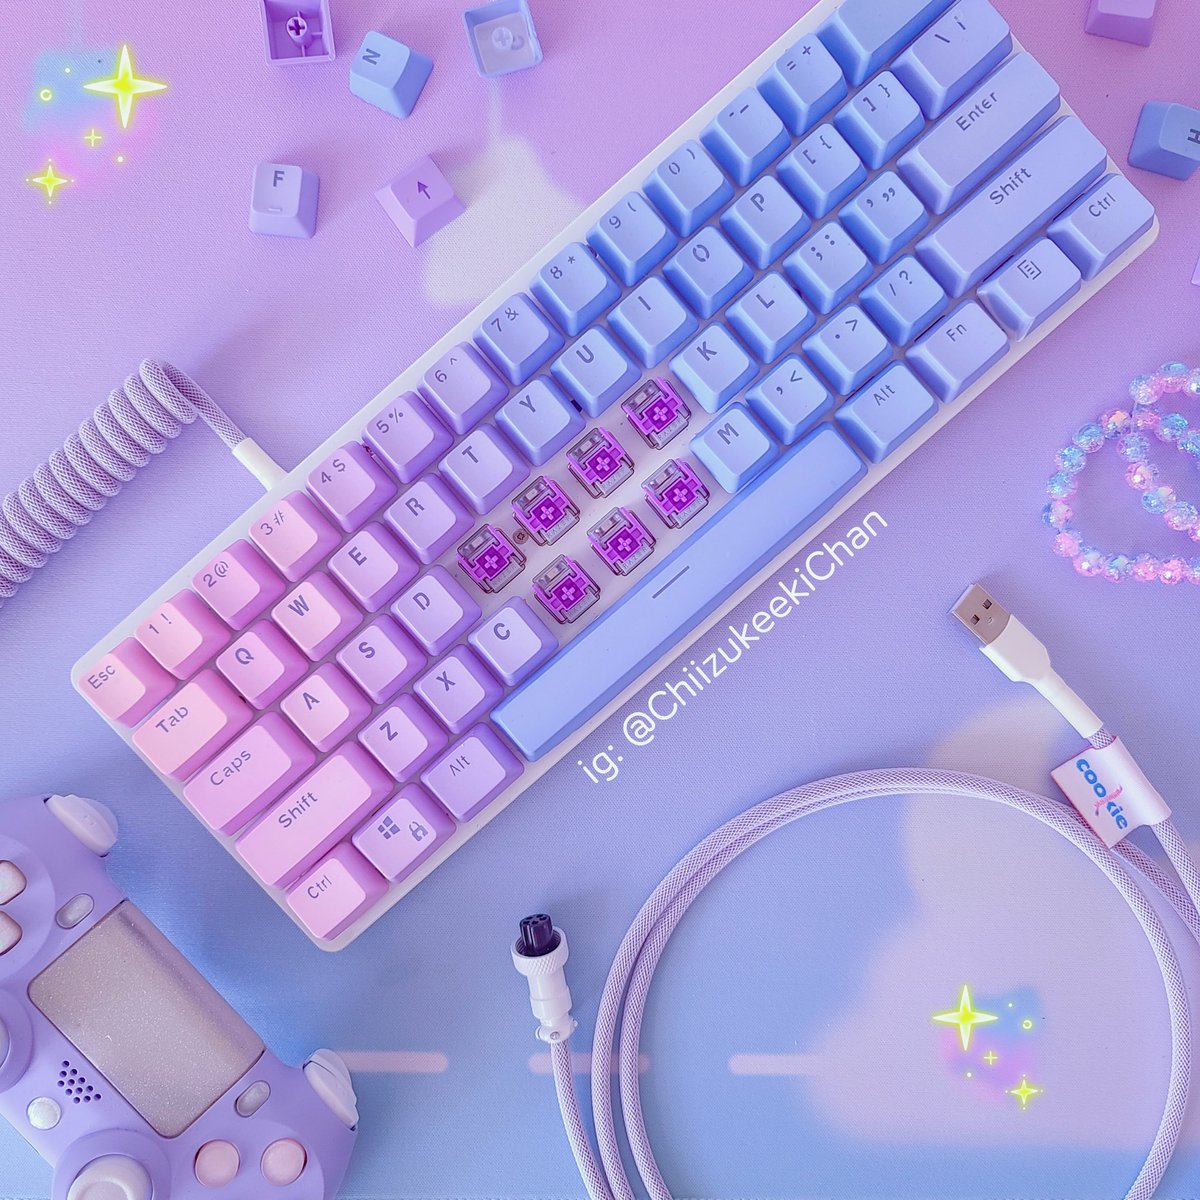 New lilac coiled keyboard cables from @CookieCables 💜 Check out the unboxing video on Tiktok: bit.ly/2W2LXkk #purplesetup #purplegamingsetup #pastel #pcsetup